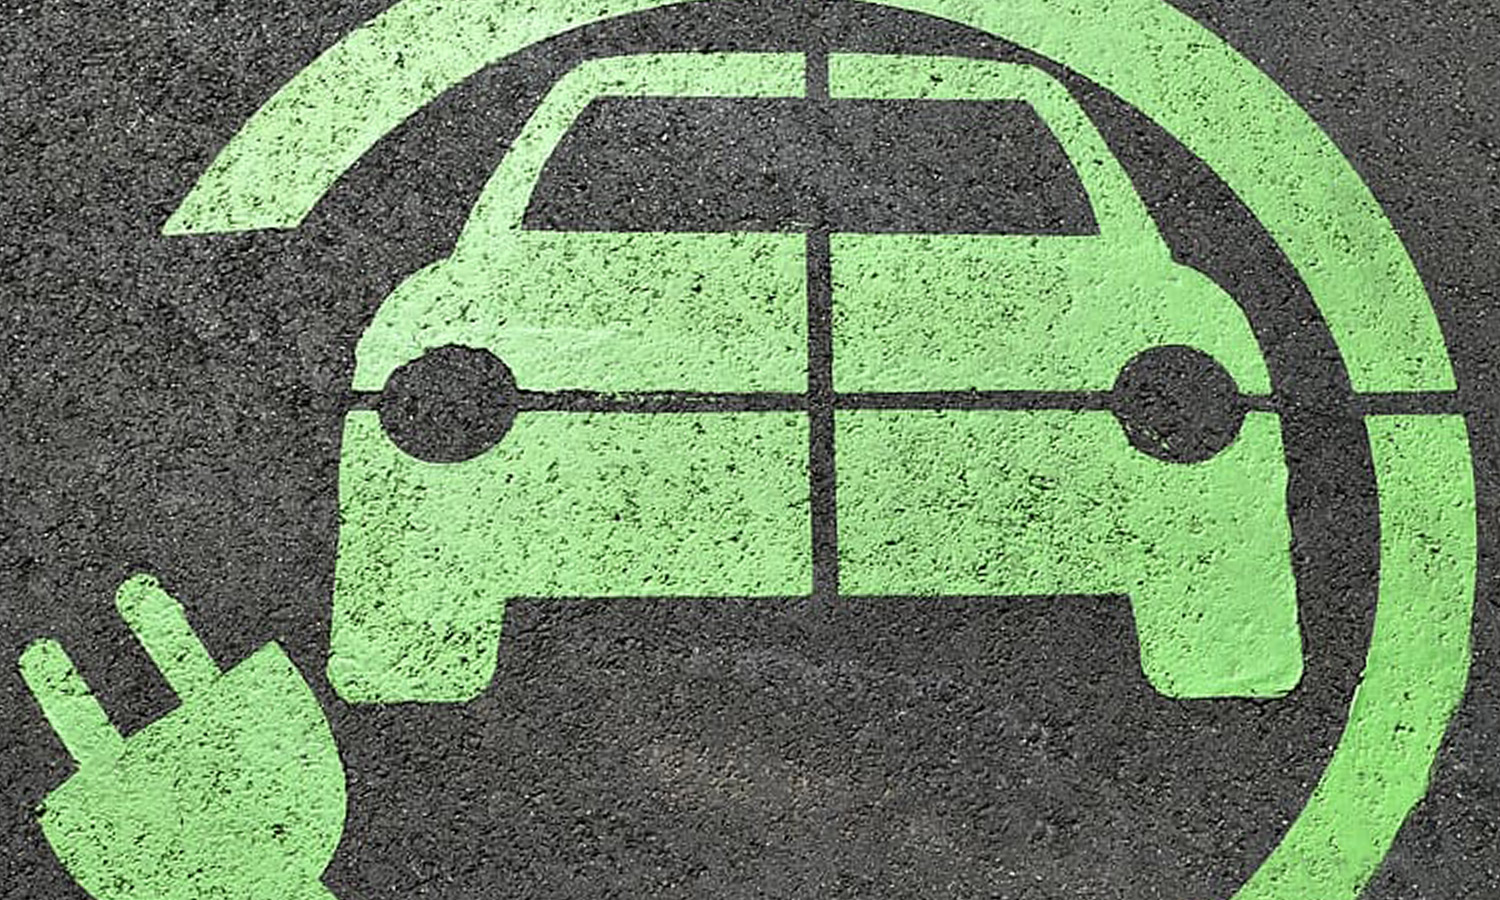 Ask a Scientist Electric Vehicles are the Cleanest Option Today